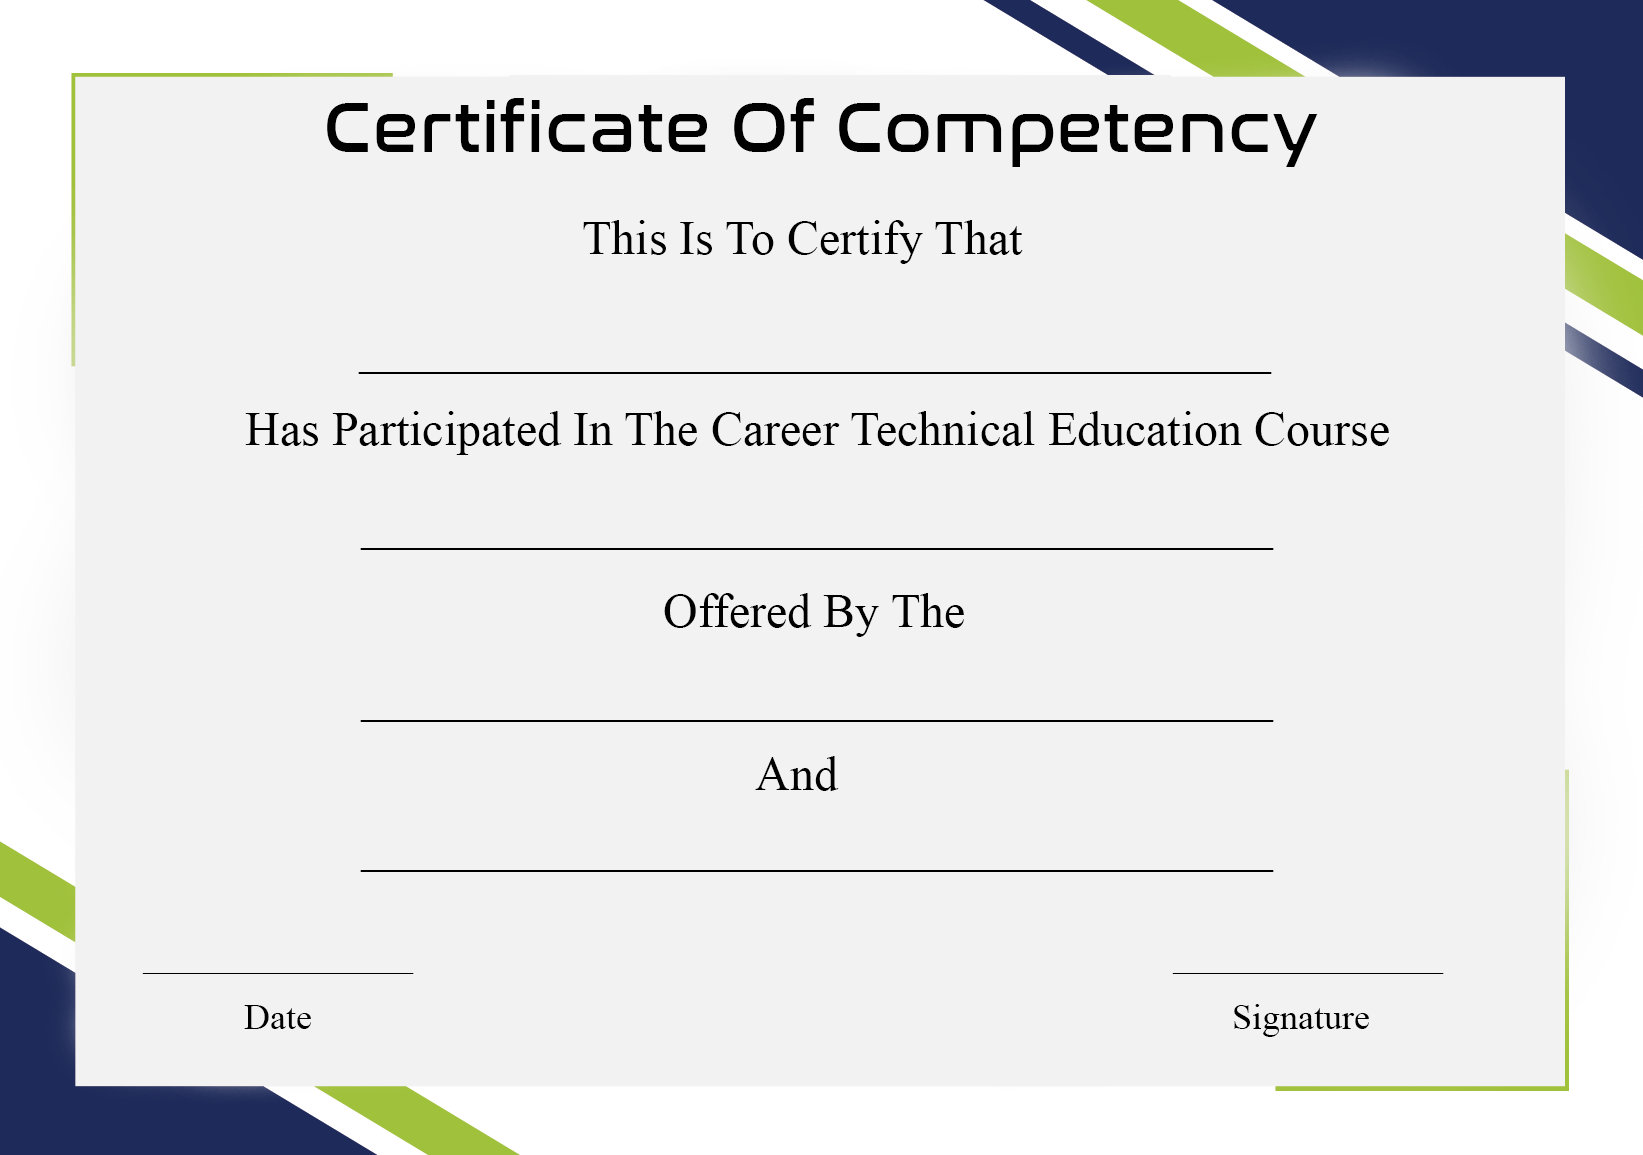 Certificate of Competency Sample